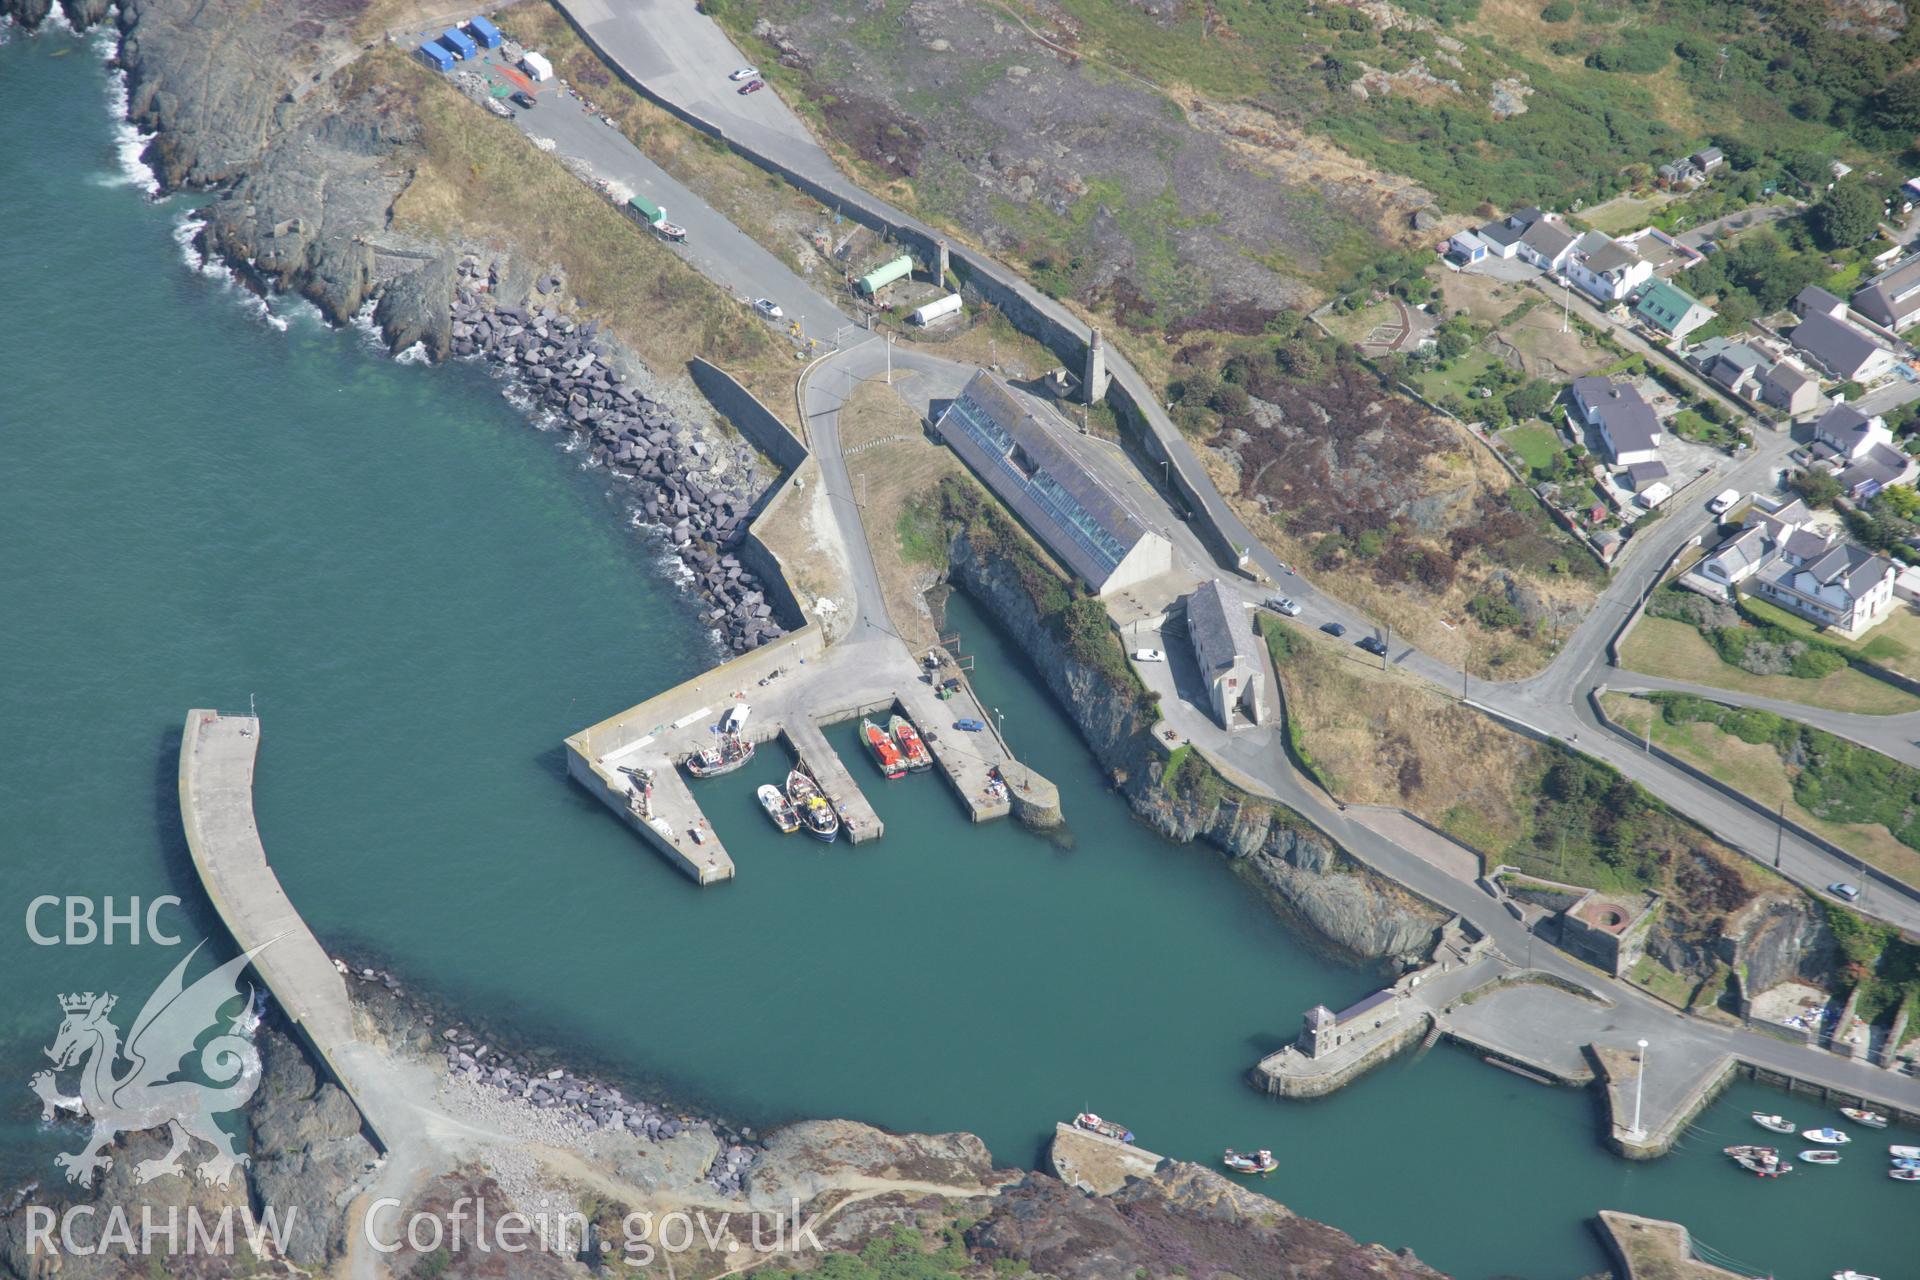 RCAHMW colour oblique aerial photograph of Porth Amlwch. Taken on 14 August 2006 by Toby Driver.